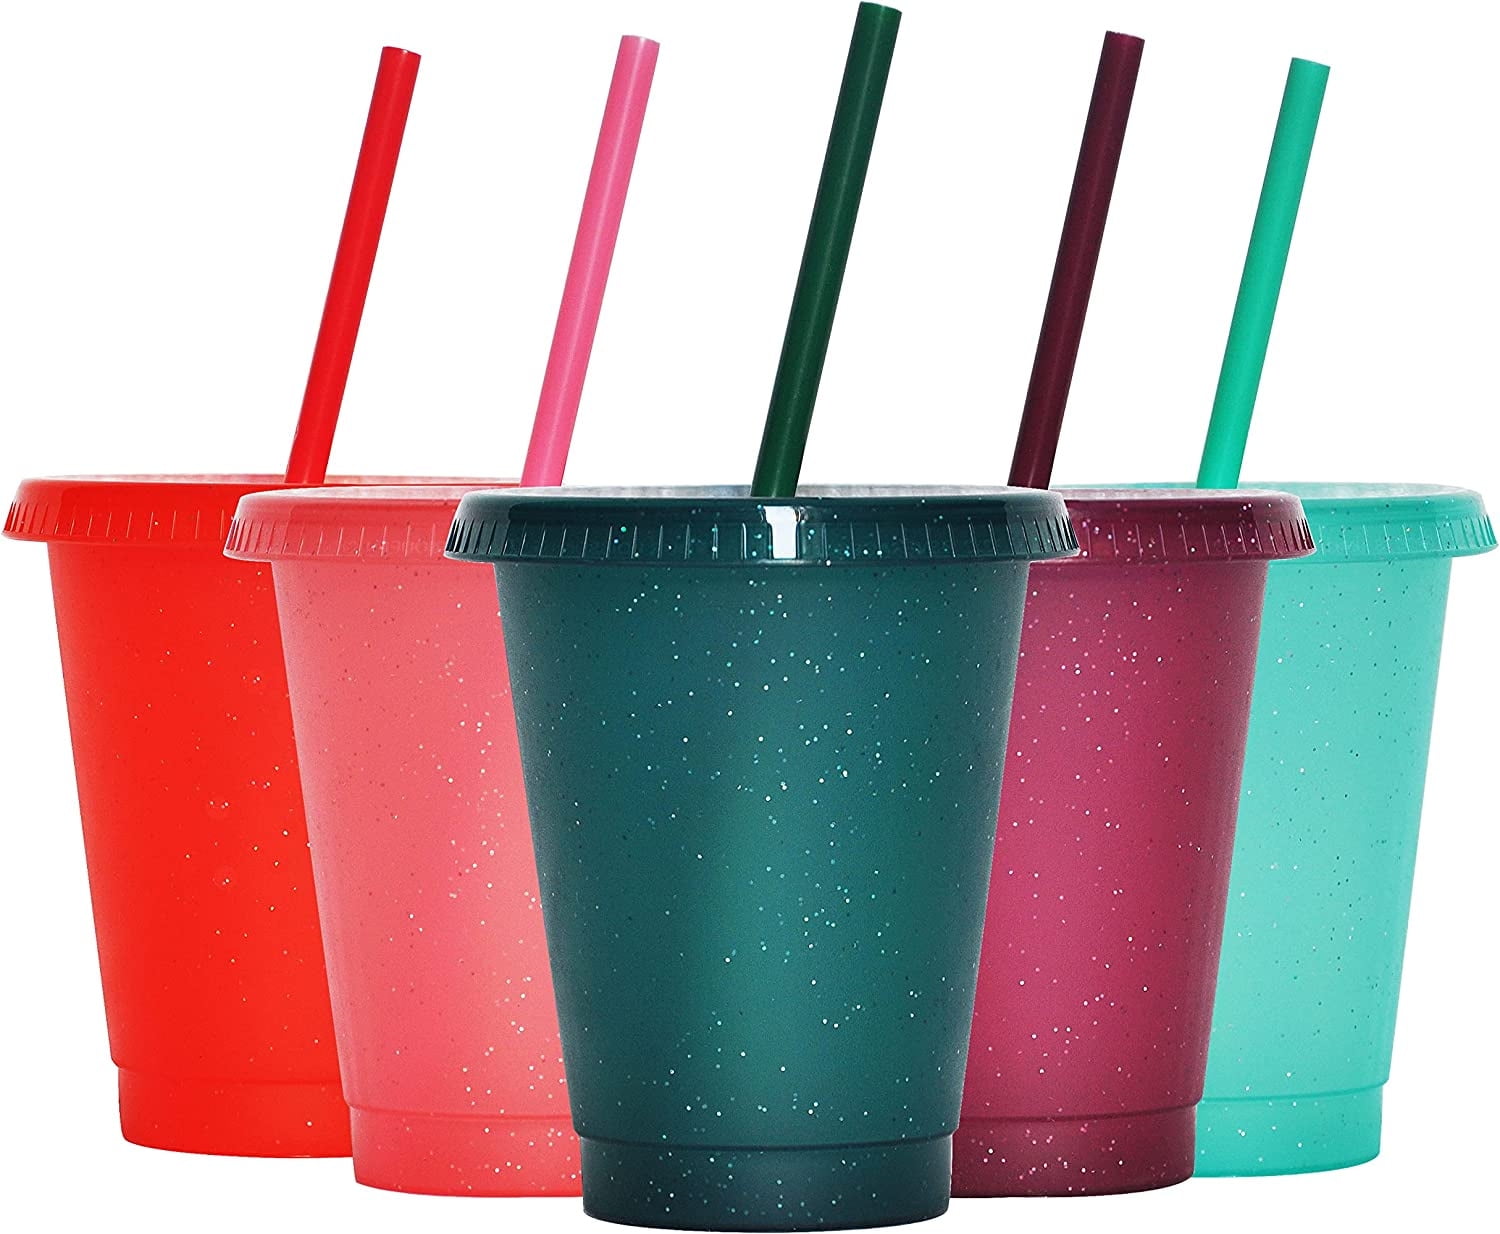 Kids　Set　with　Bulk　Drinking　Cup　Straws　for　16oz　Party　Smoothie　Plastic　Pack　Iced　Reusable　Tumblers　Cute　Water　Travel　Lids:Casewin　Cups　Coffee